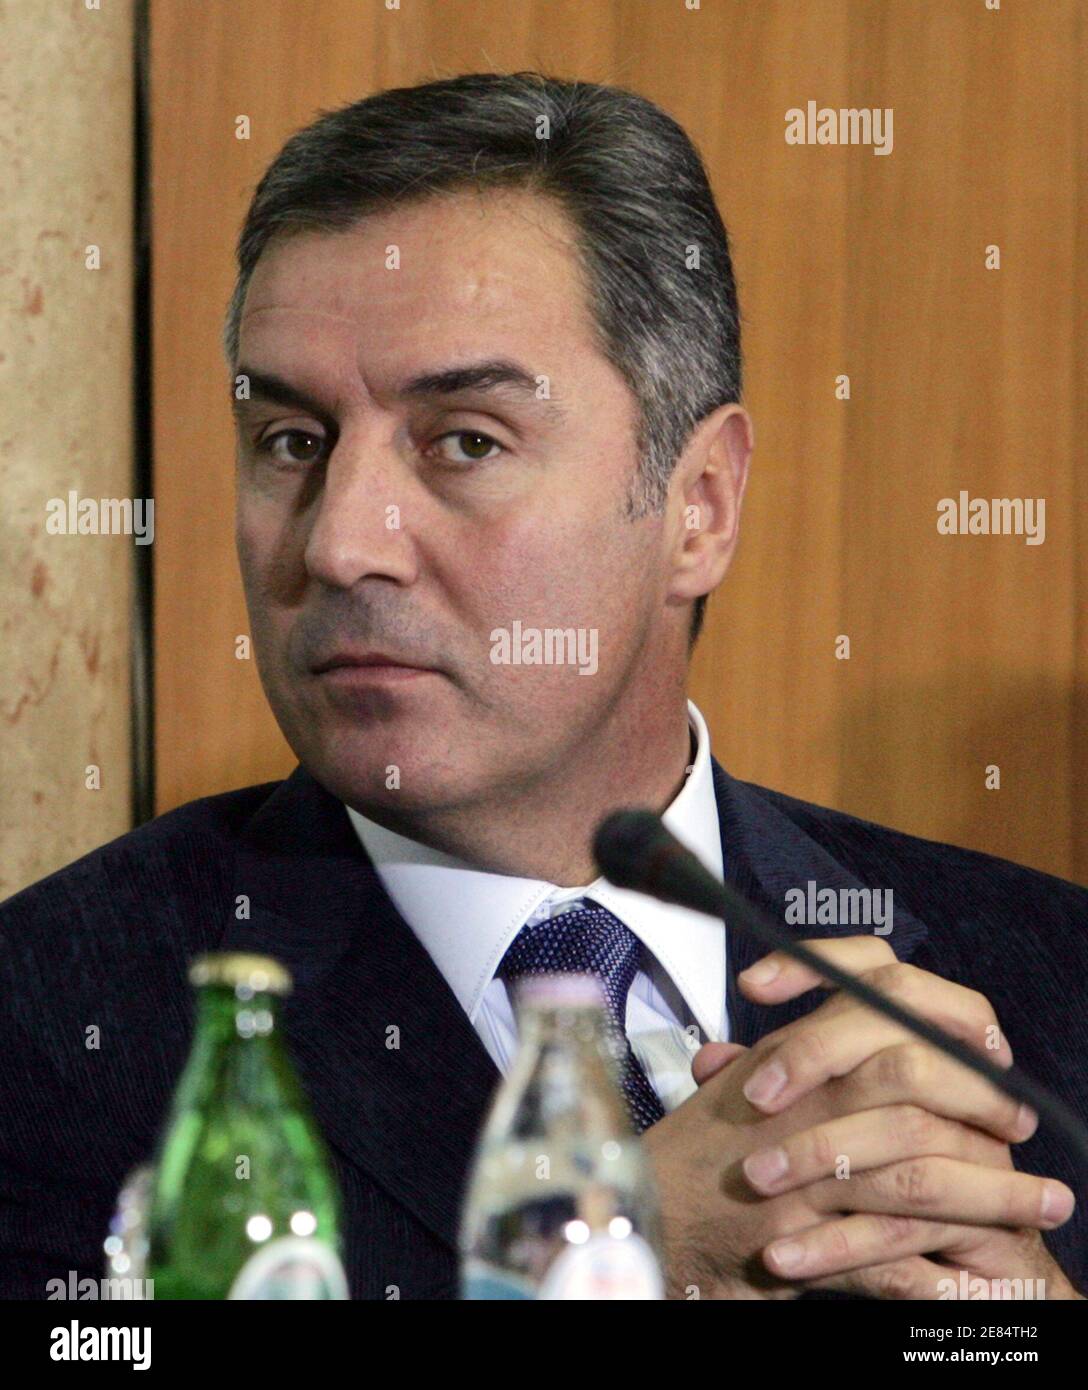 Montenegro's former prime minister Milo Djukanovic is seen during a meeting in Belgrade in this October 10, 2005 file photo.  Djukanovic, the longest-serving politician in the Balkans, is expected to return to power next month as current PM Zeljko Sturanovic, who suffers from lung cancer, could step down as early as next week at a DPS main board session, according to senior officials in the governing Democratic Party of Socialists (DPS).   REUTERS/Ivan Milutinovic / SERBIA (files) Stock Photo